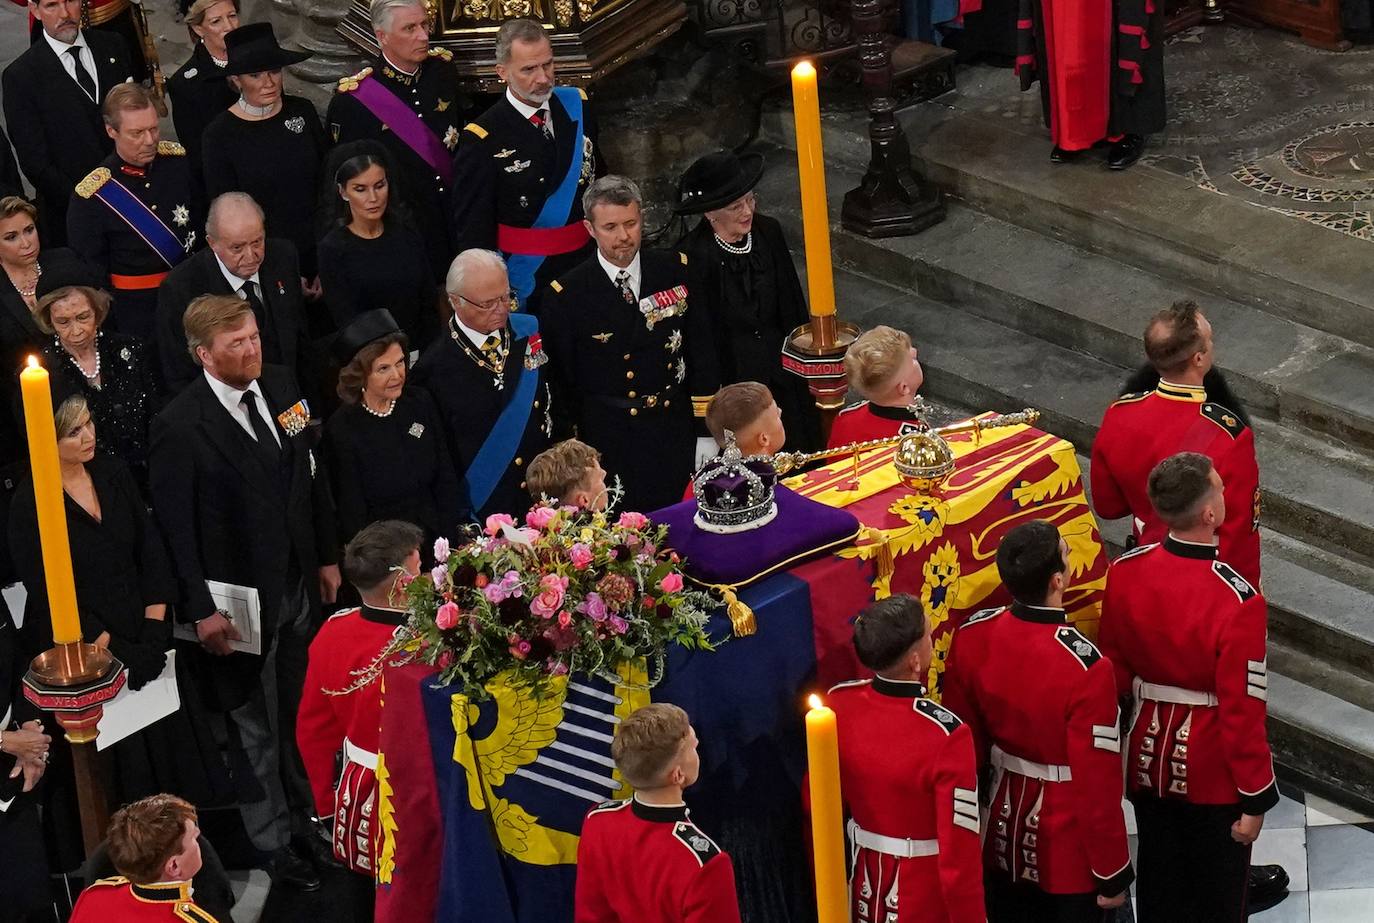 Spain's King and Queen as well as other royalty and world leaders attended the funeral of Queen Elizabeth II. /AFP